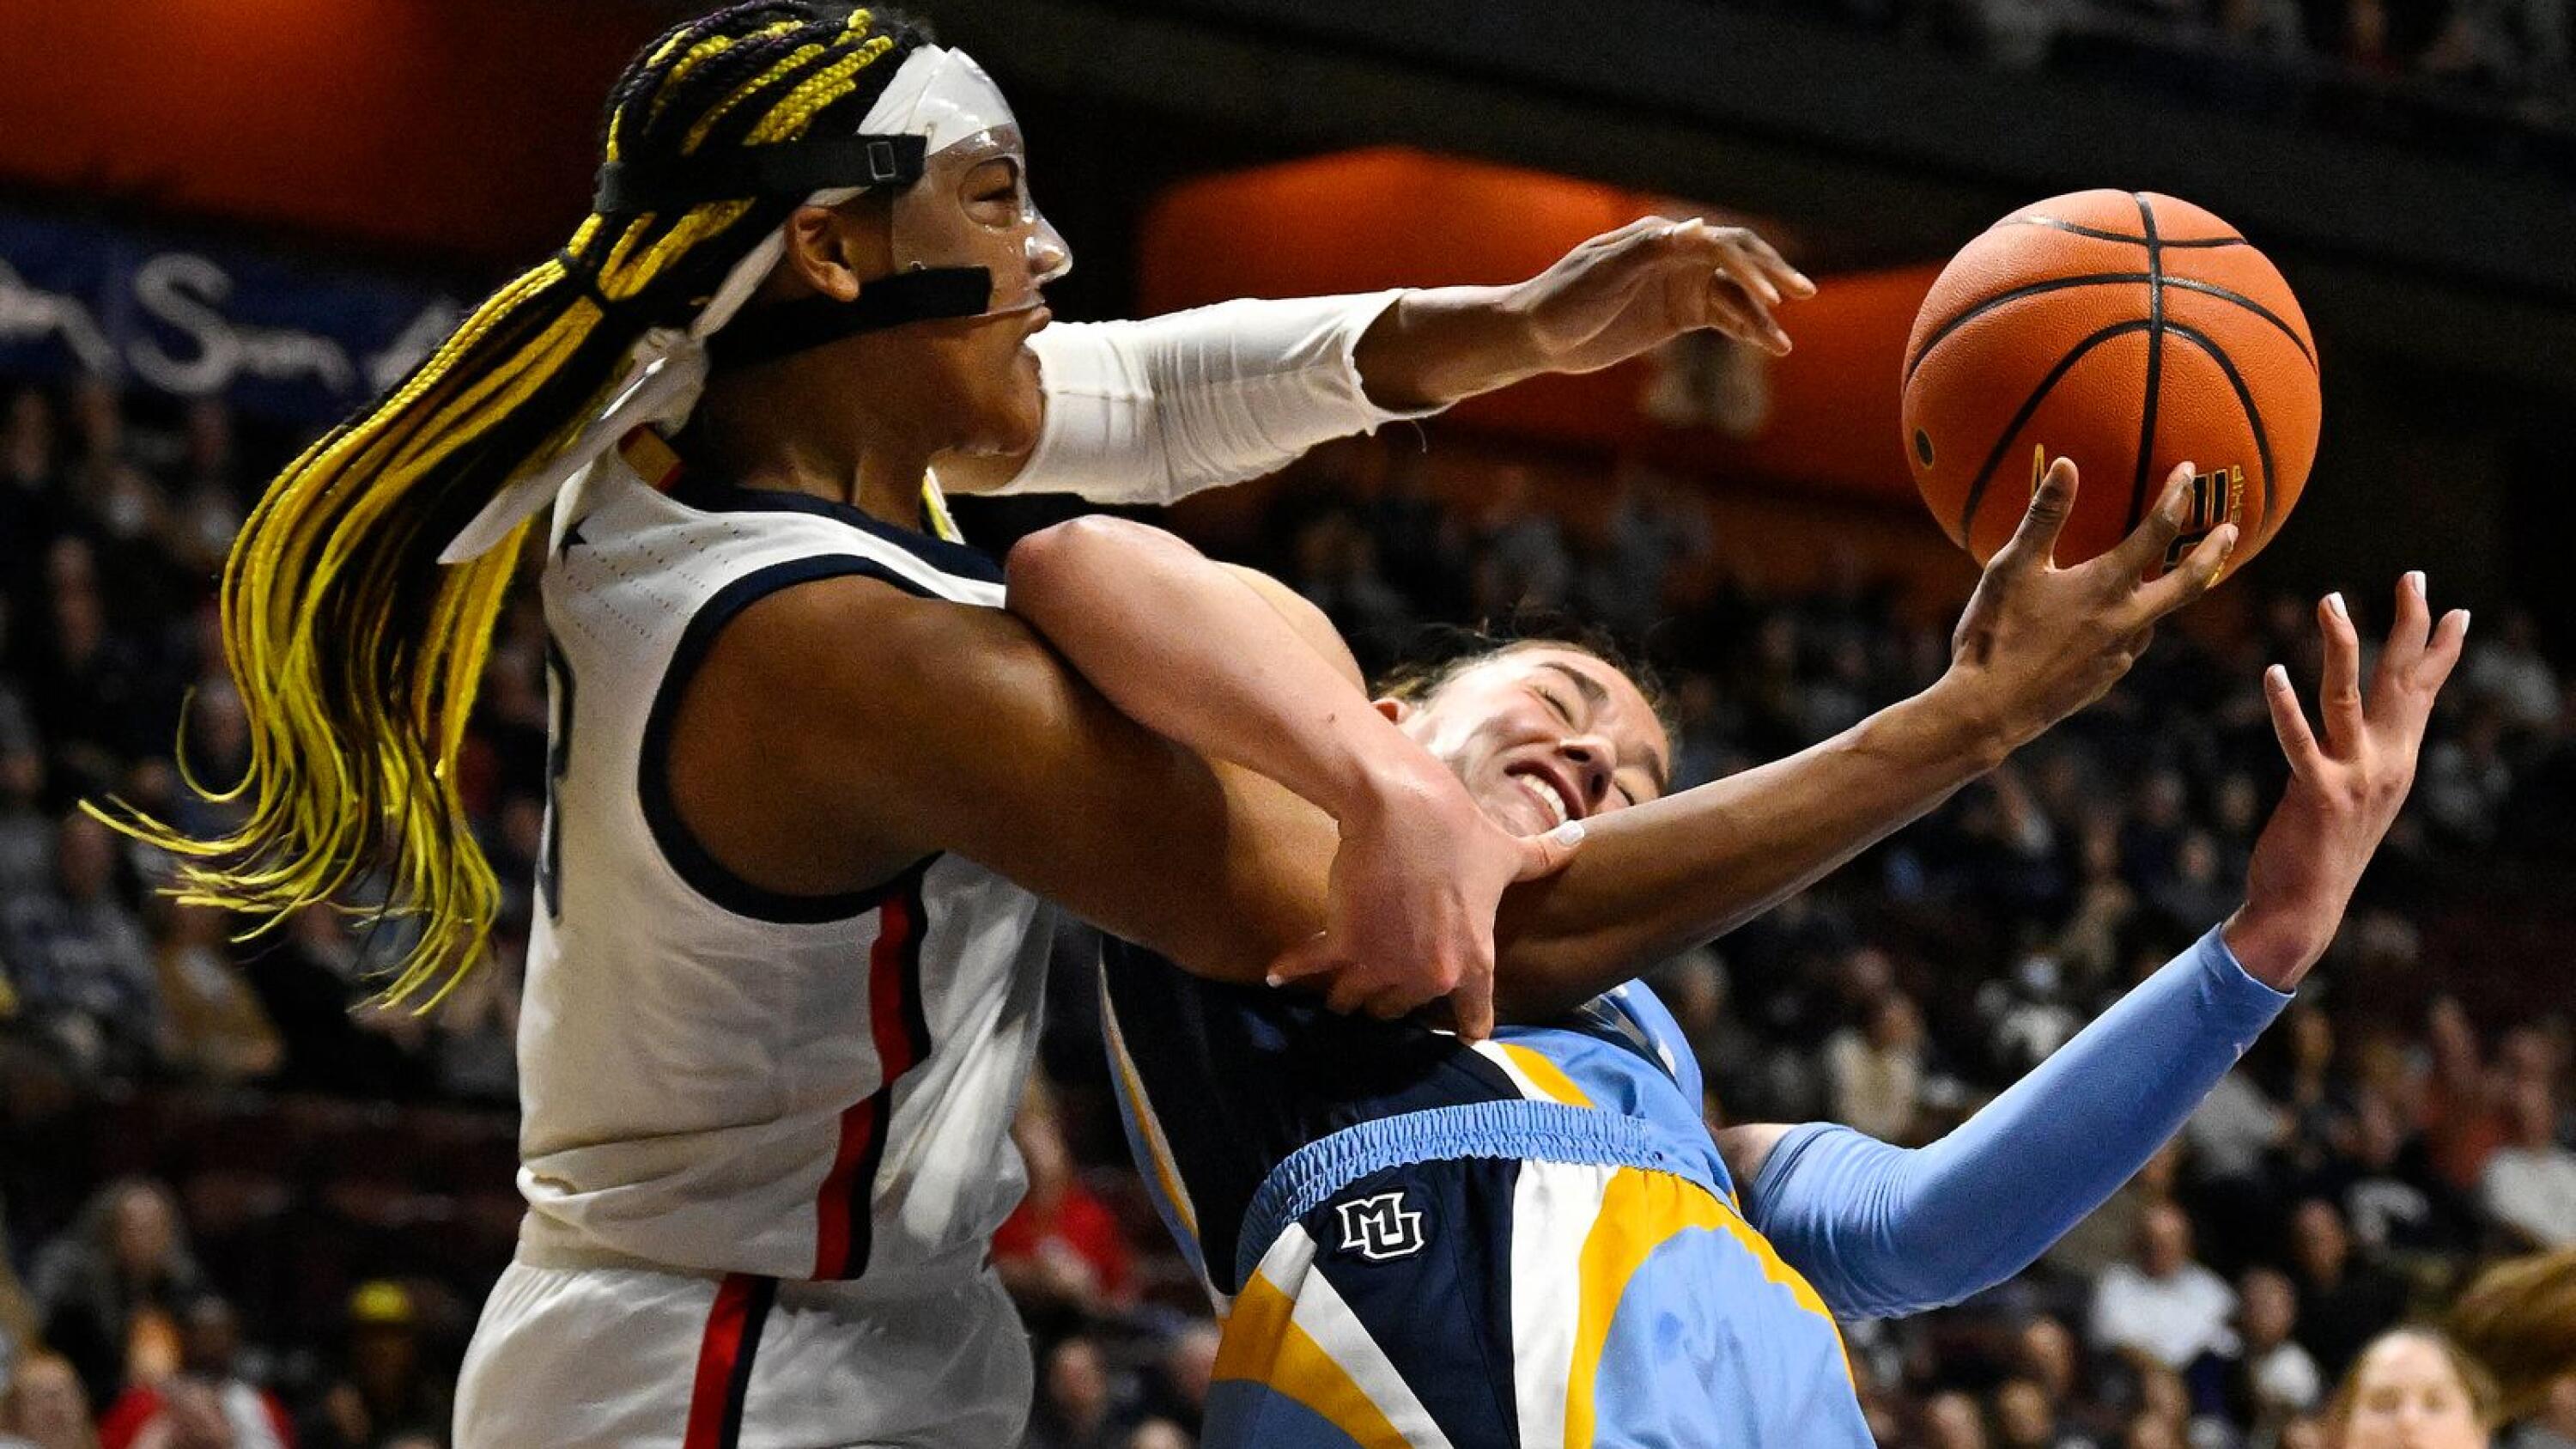 Marquette has tough early games in Big East schedule